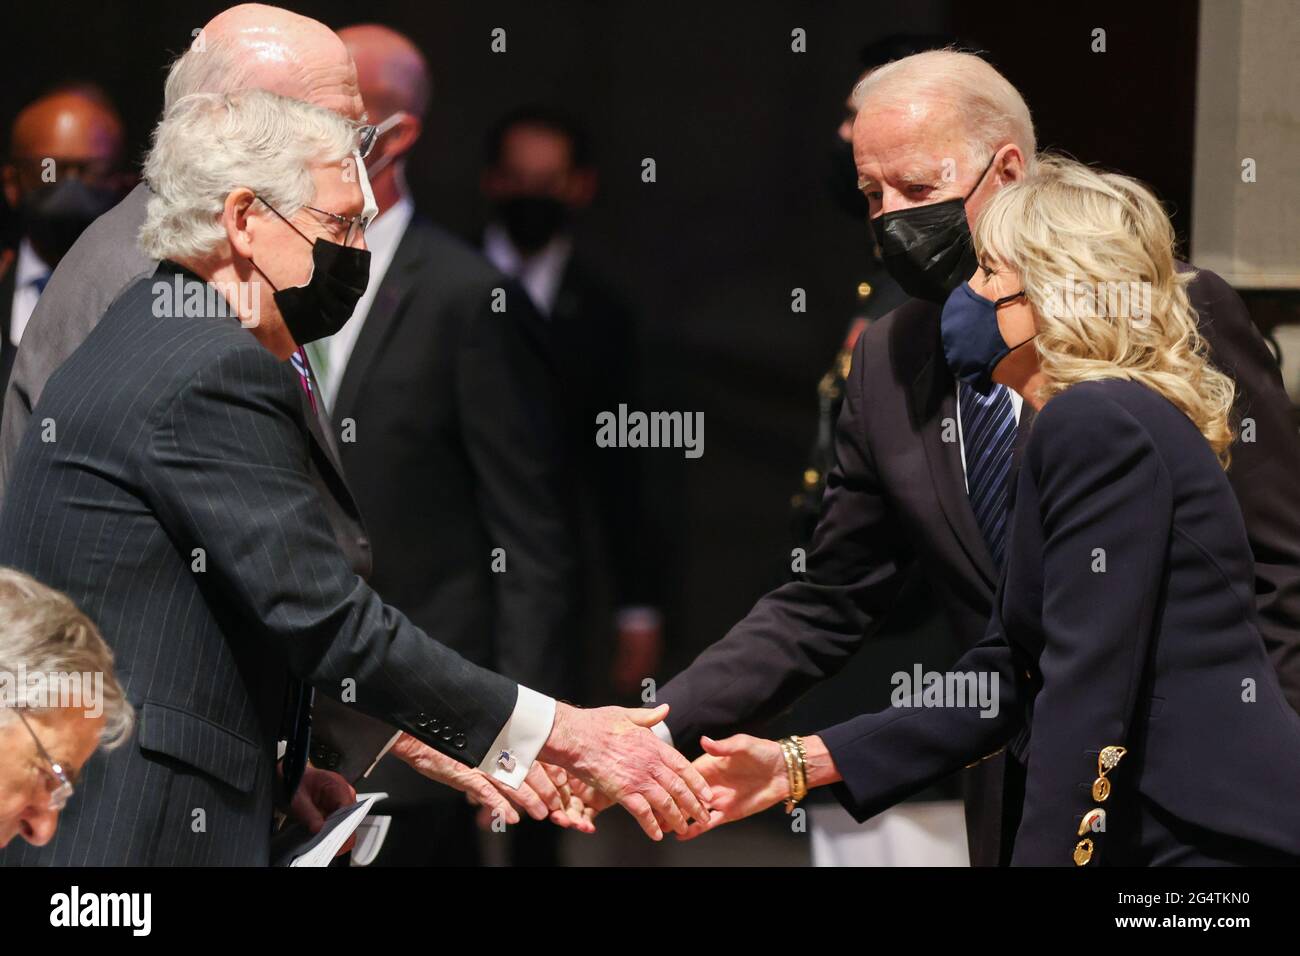 Senate Minority Leader Mitch McConnell (R-KY) greets President Joe Biden and first lady Jill Biden at the funeral ceremony of former Senator John Warner at Washington National Cathedral in Washington, DC, U.S. June 23, 2021. Oliver Contreras/Pool via REUTERS Stock Photo